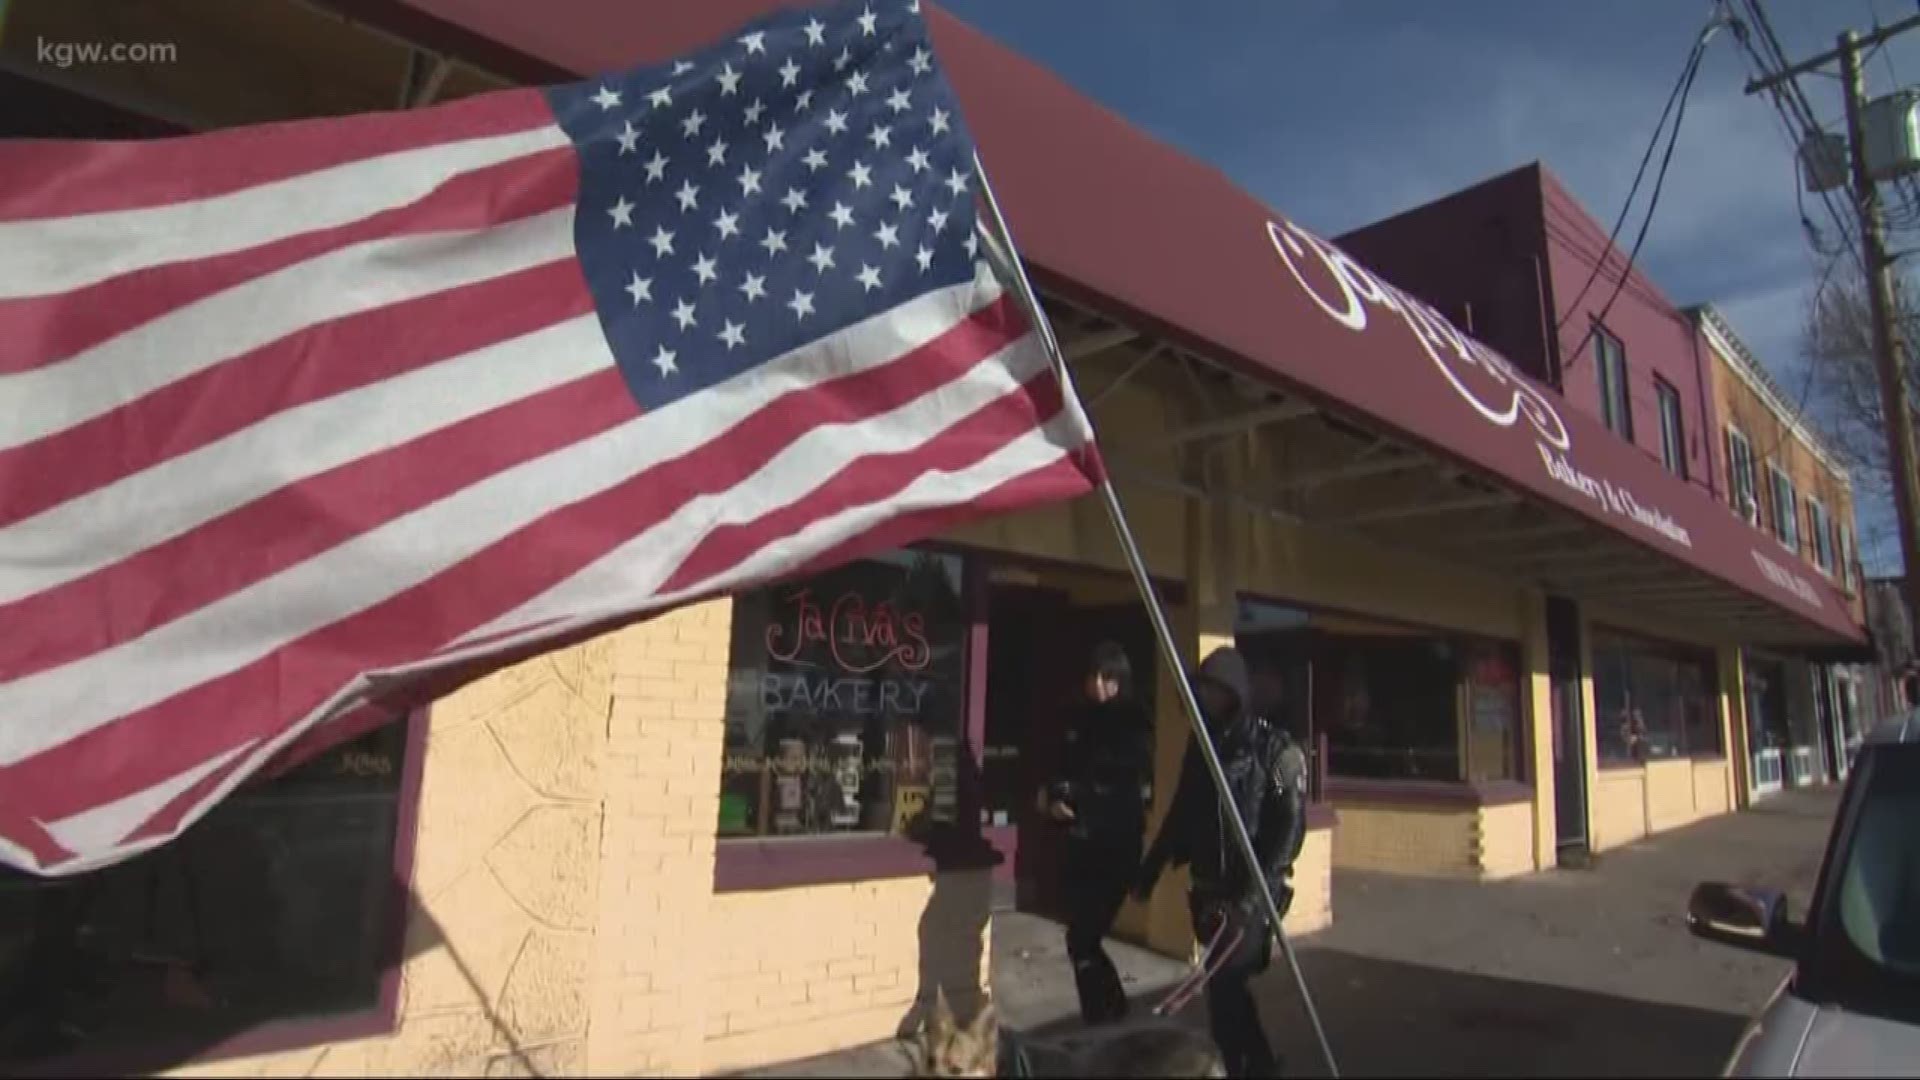 Who is behind the U.S. flags that go up in Portland's Hawthorne District several times a year? Meet Iva Elmer, owner of Jaciva's bakery.